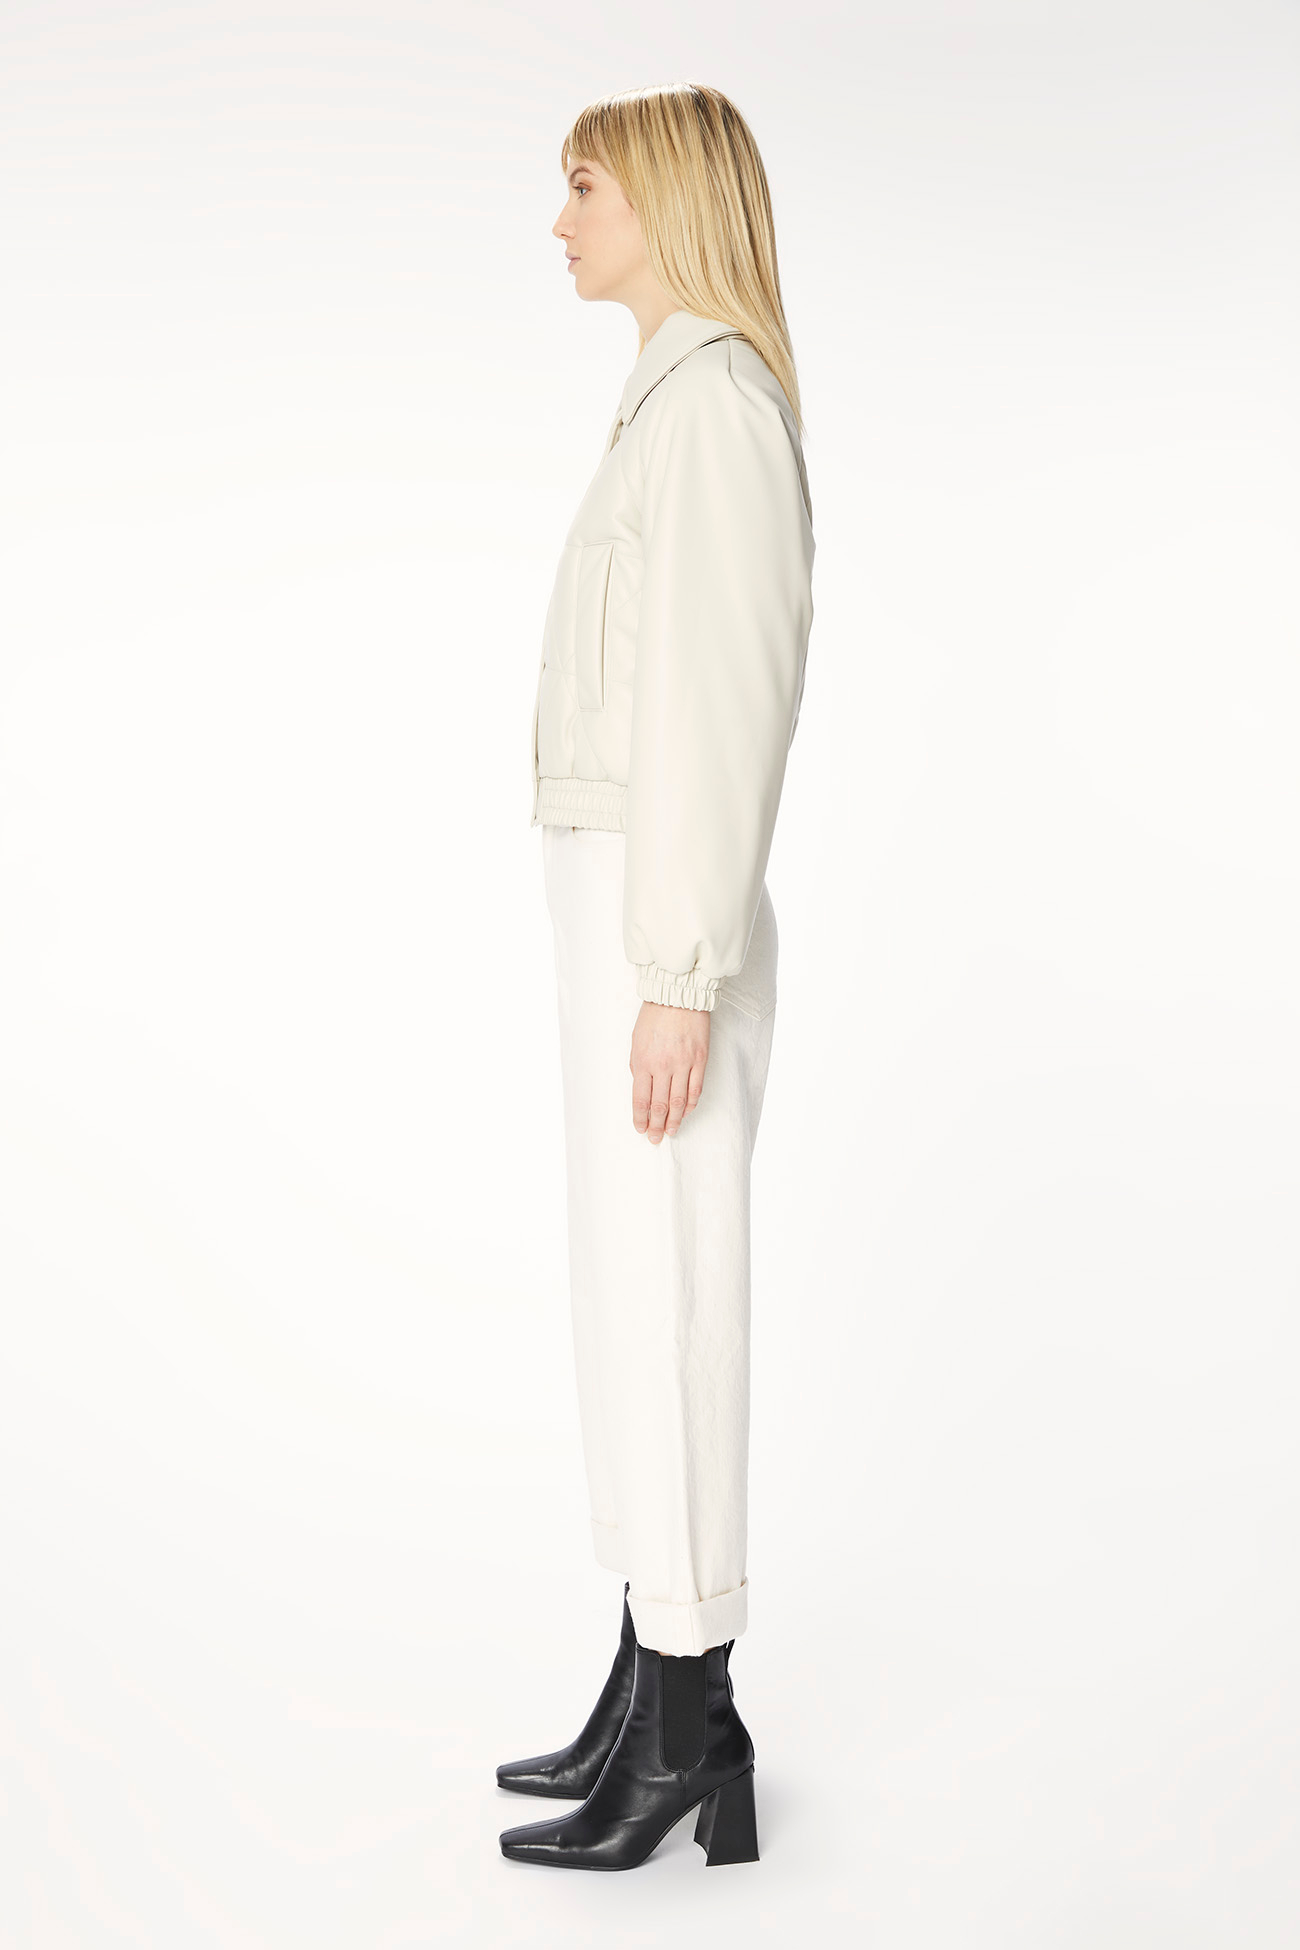 JACKET 9201 MADE IN ECO LEATHER - NATURAL WHITE - OOF WEAR